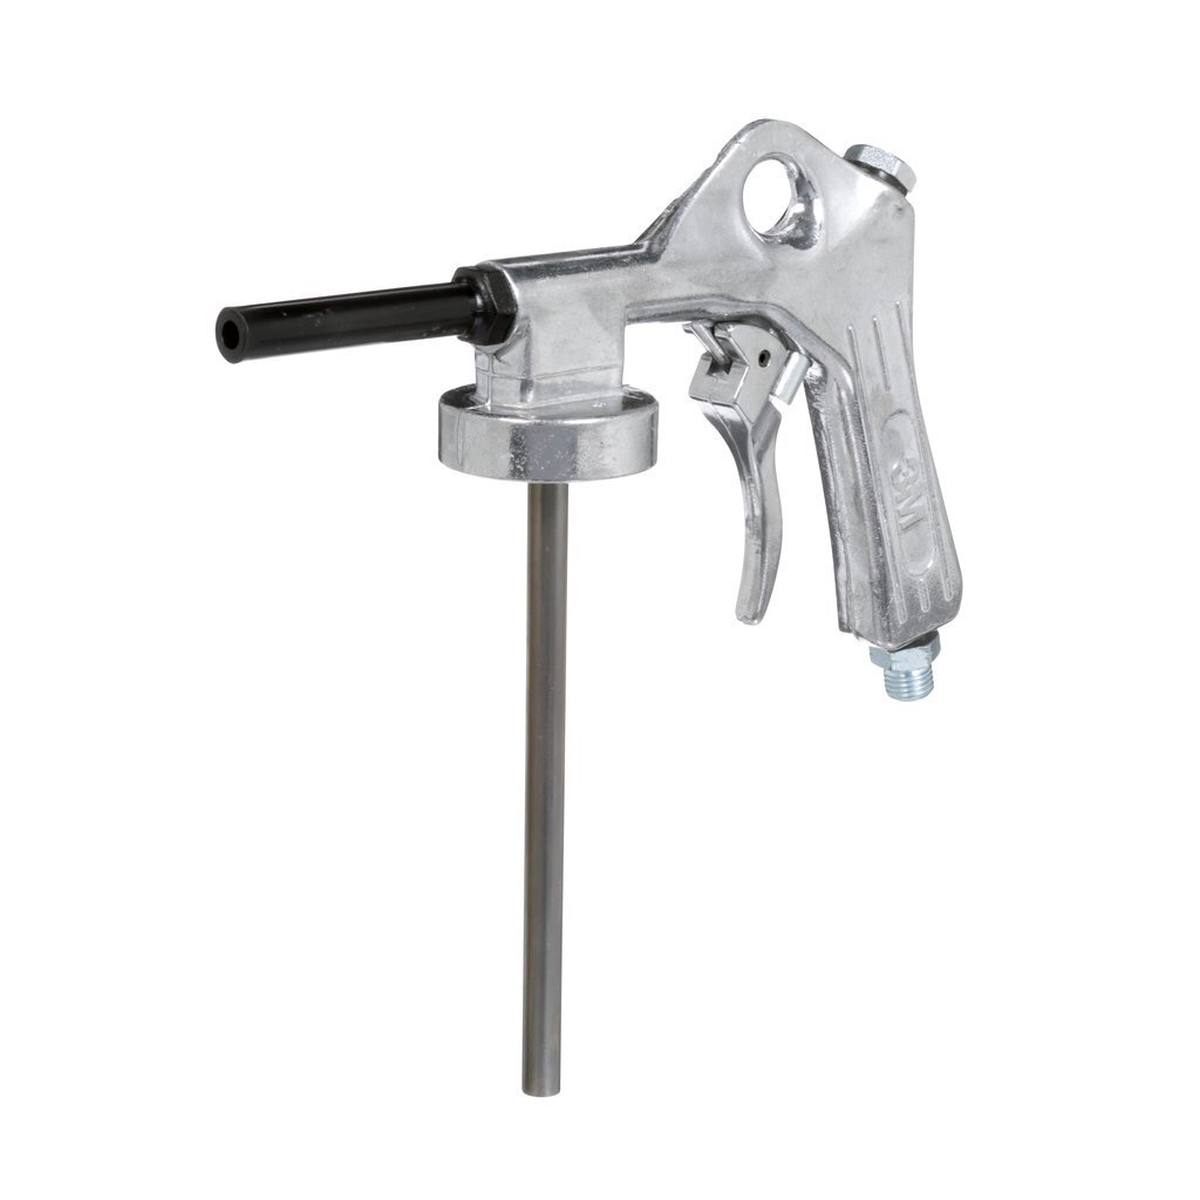 3M Cavity spray gun, for 1 litre cans